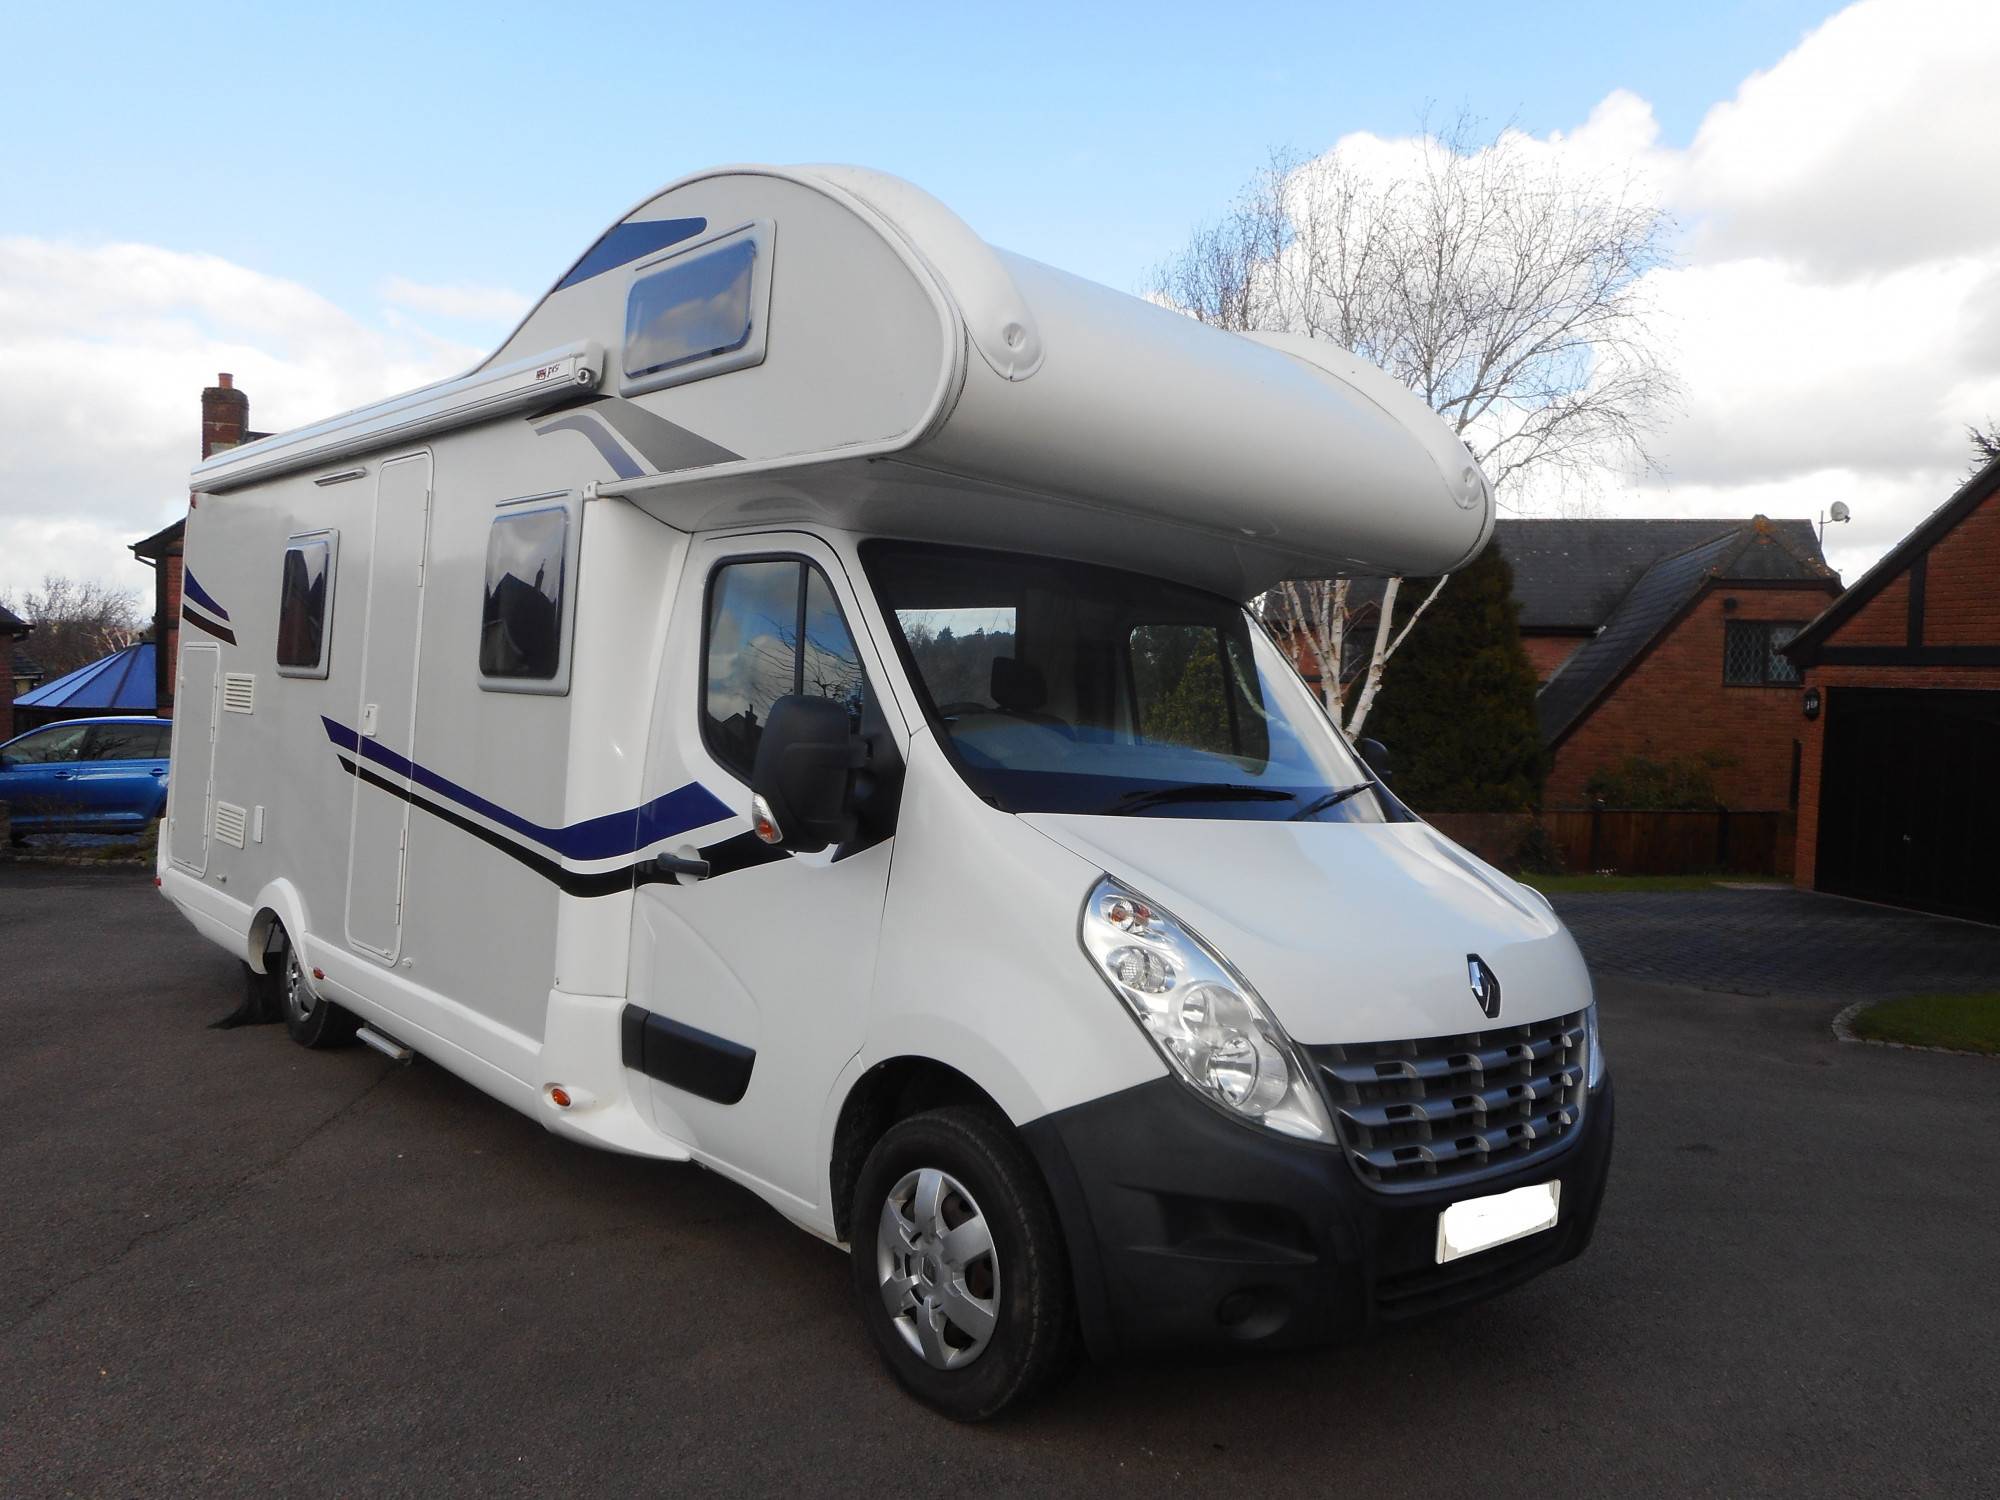 A  Motorhome called Katamarano and  for hire in High Wycombe, Buckinghamshire